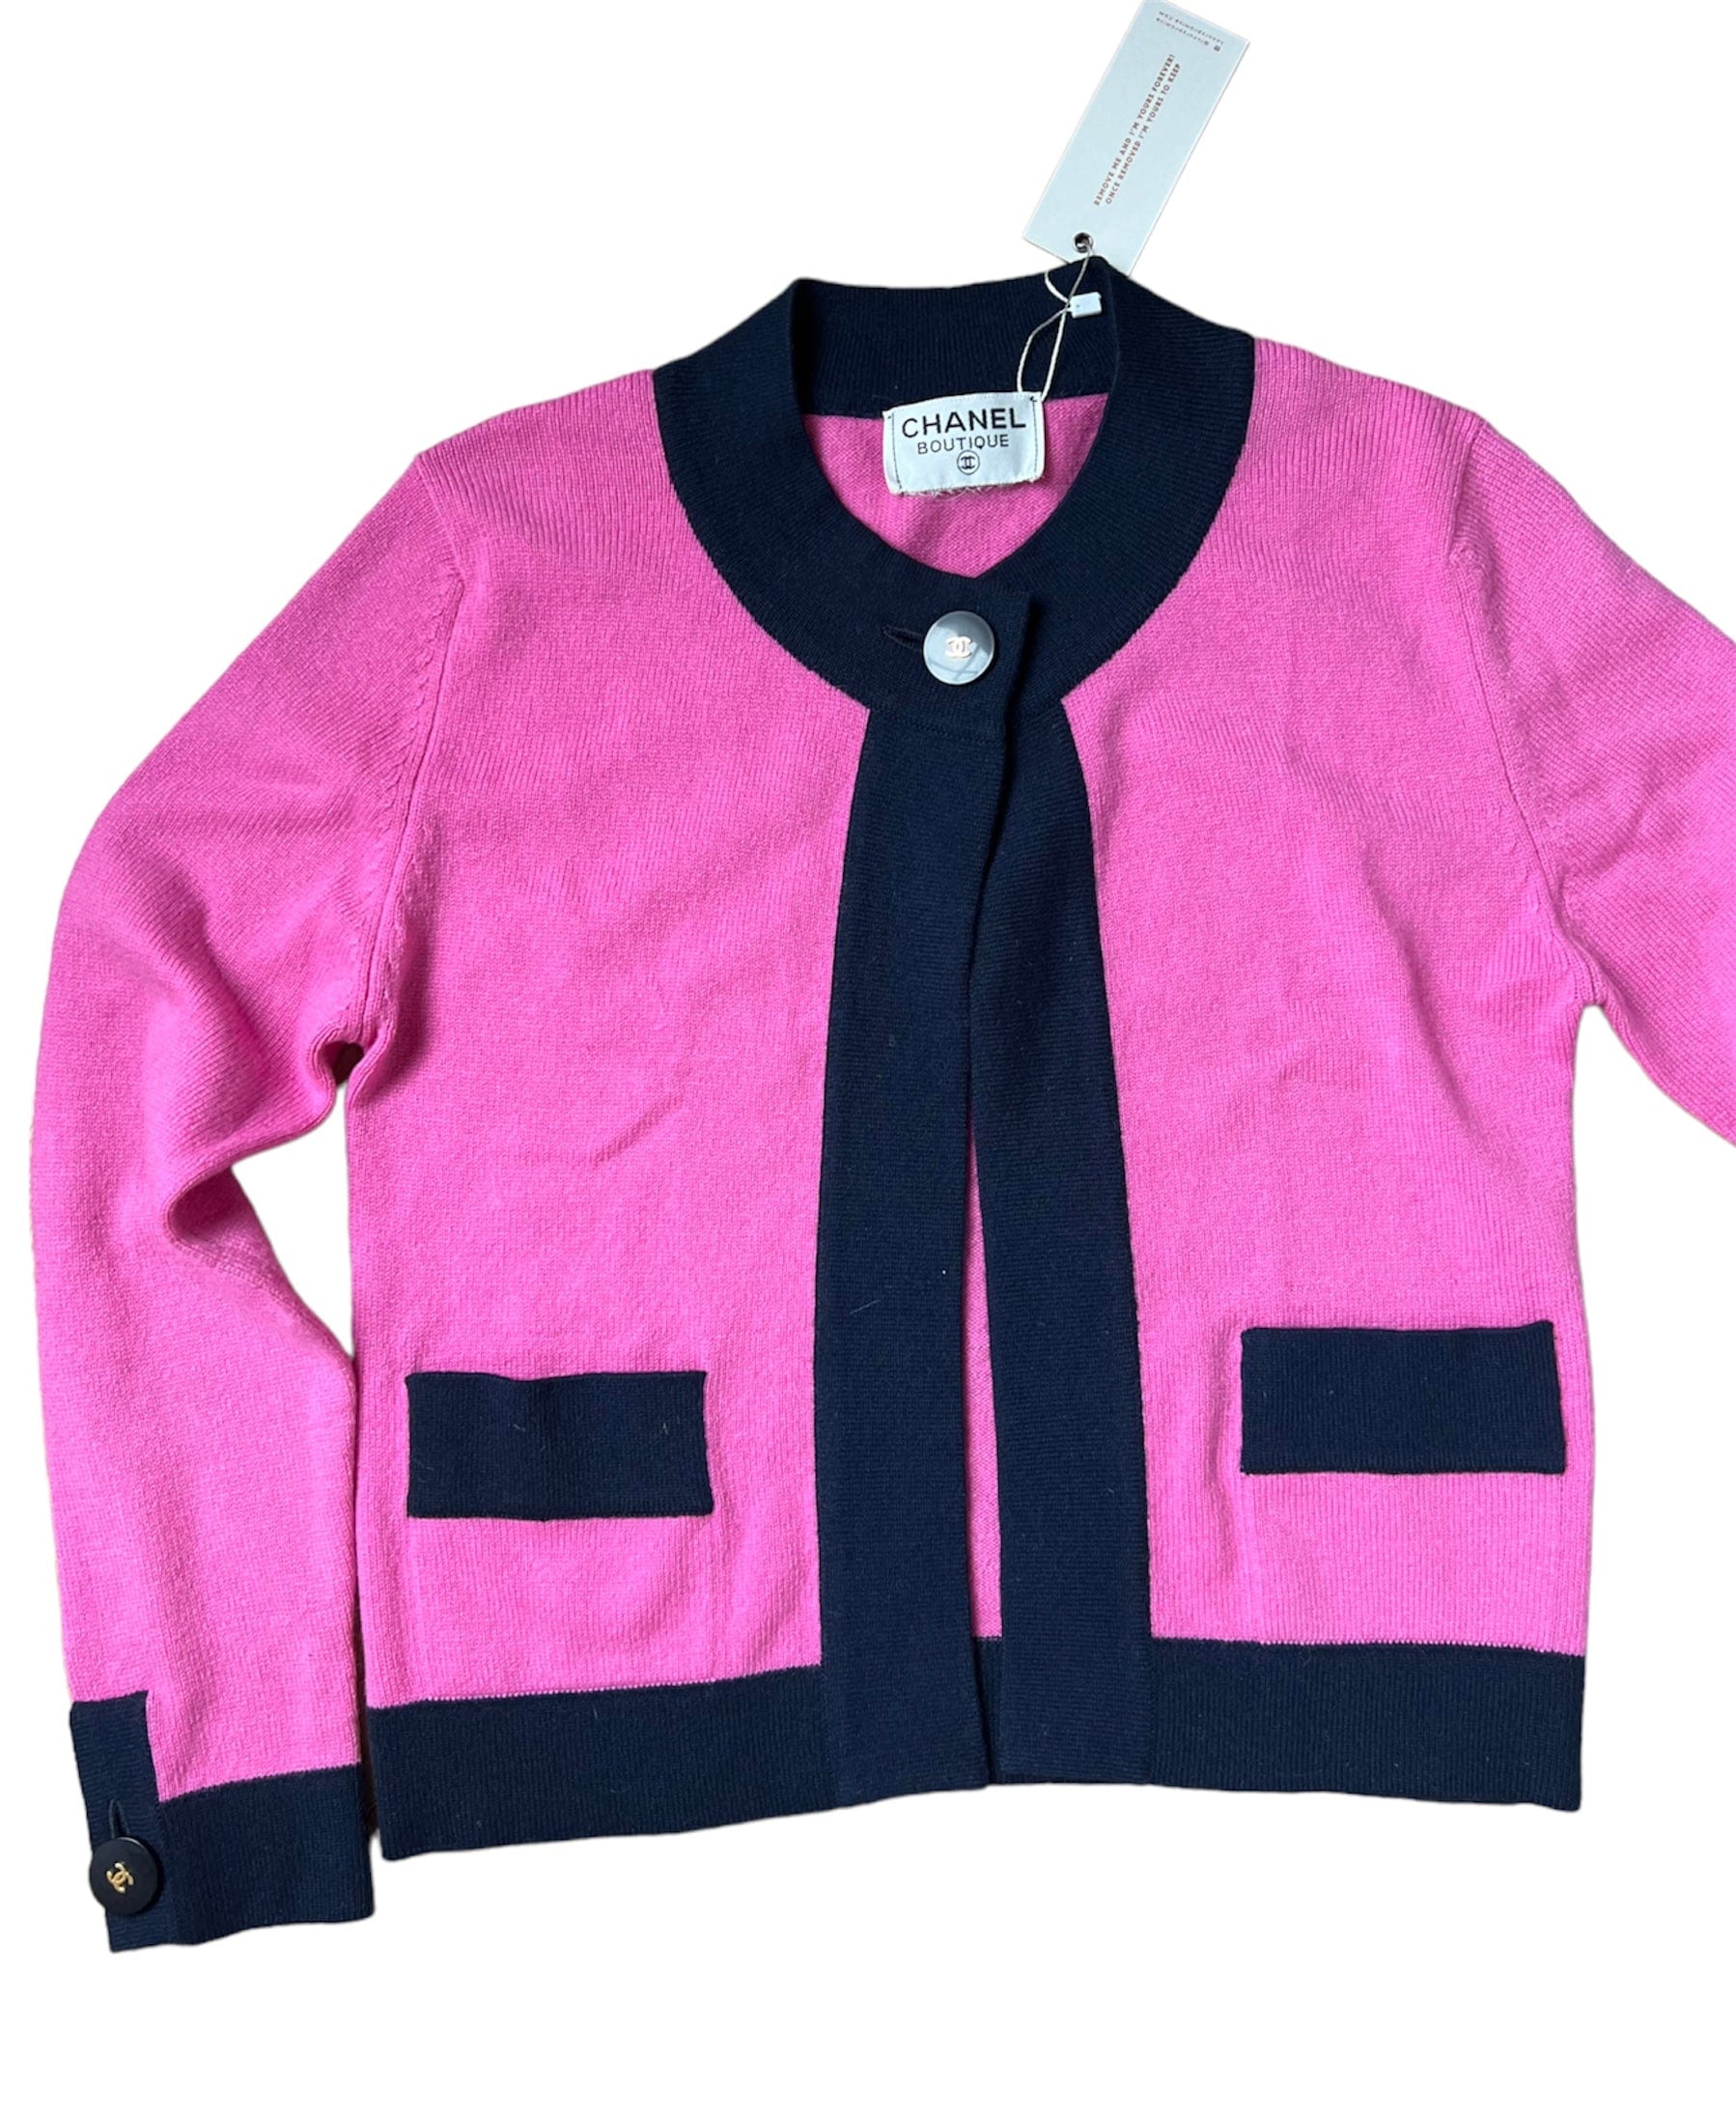 Chanel Chanel Cashmere Cardigan Pink/Navy ASL8852